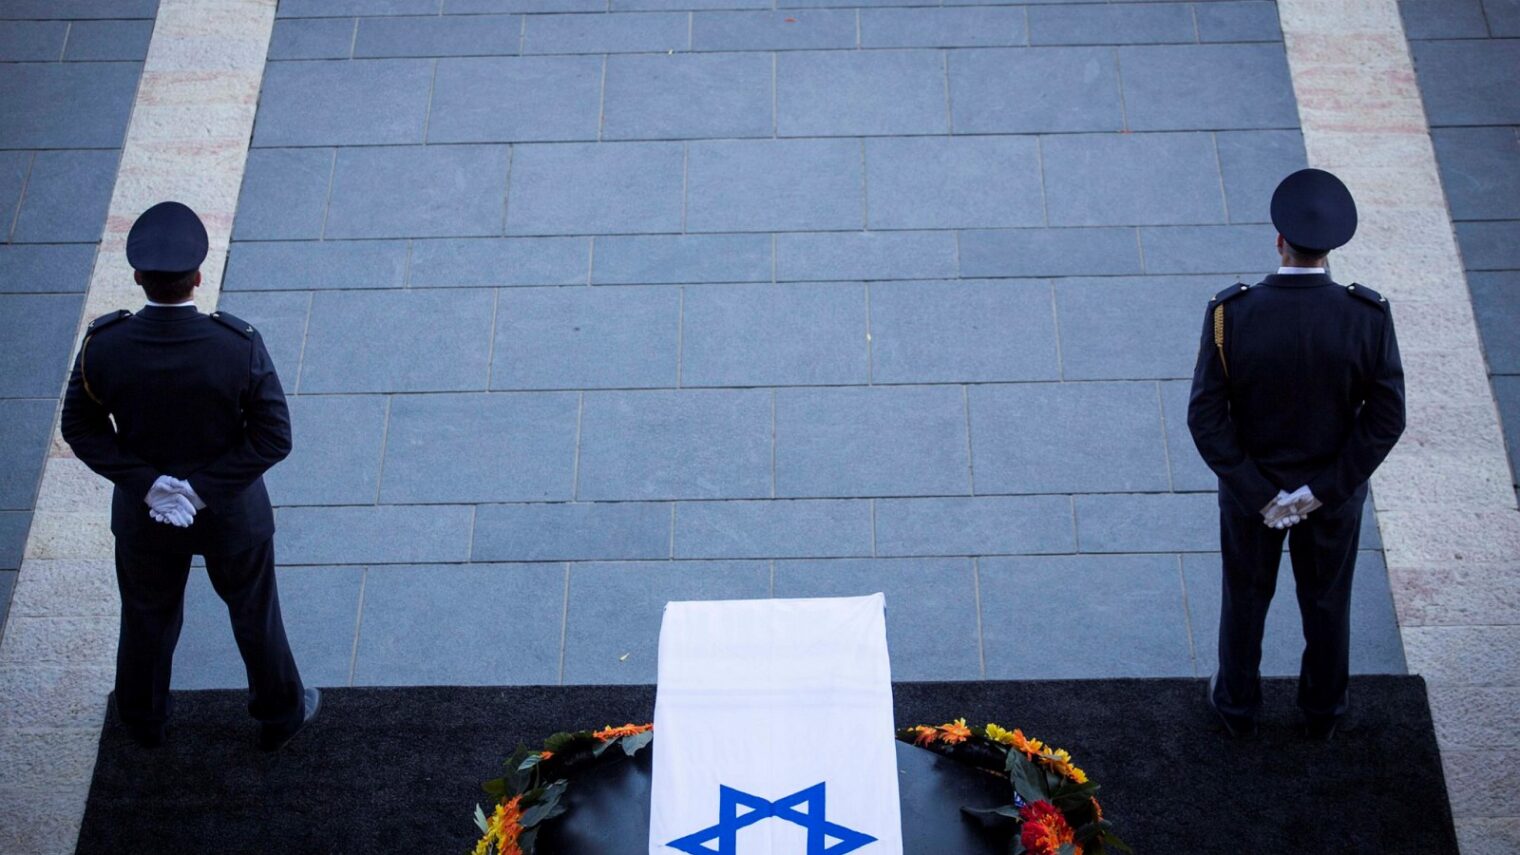 The Knesset Honor Guard stand by the coffin of Former Israeli President Shimon Peres ahead of the ceremony held at the Knesset where the public were invited to pay their last respects before his burial, in Jerusalem, on Thursday.